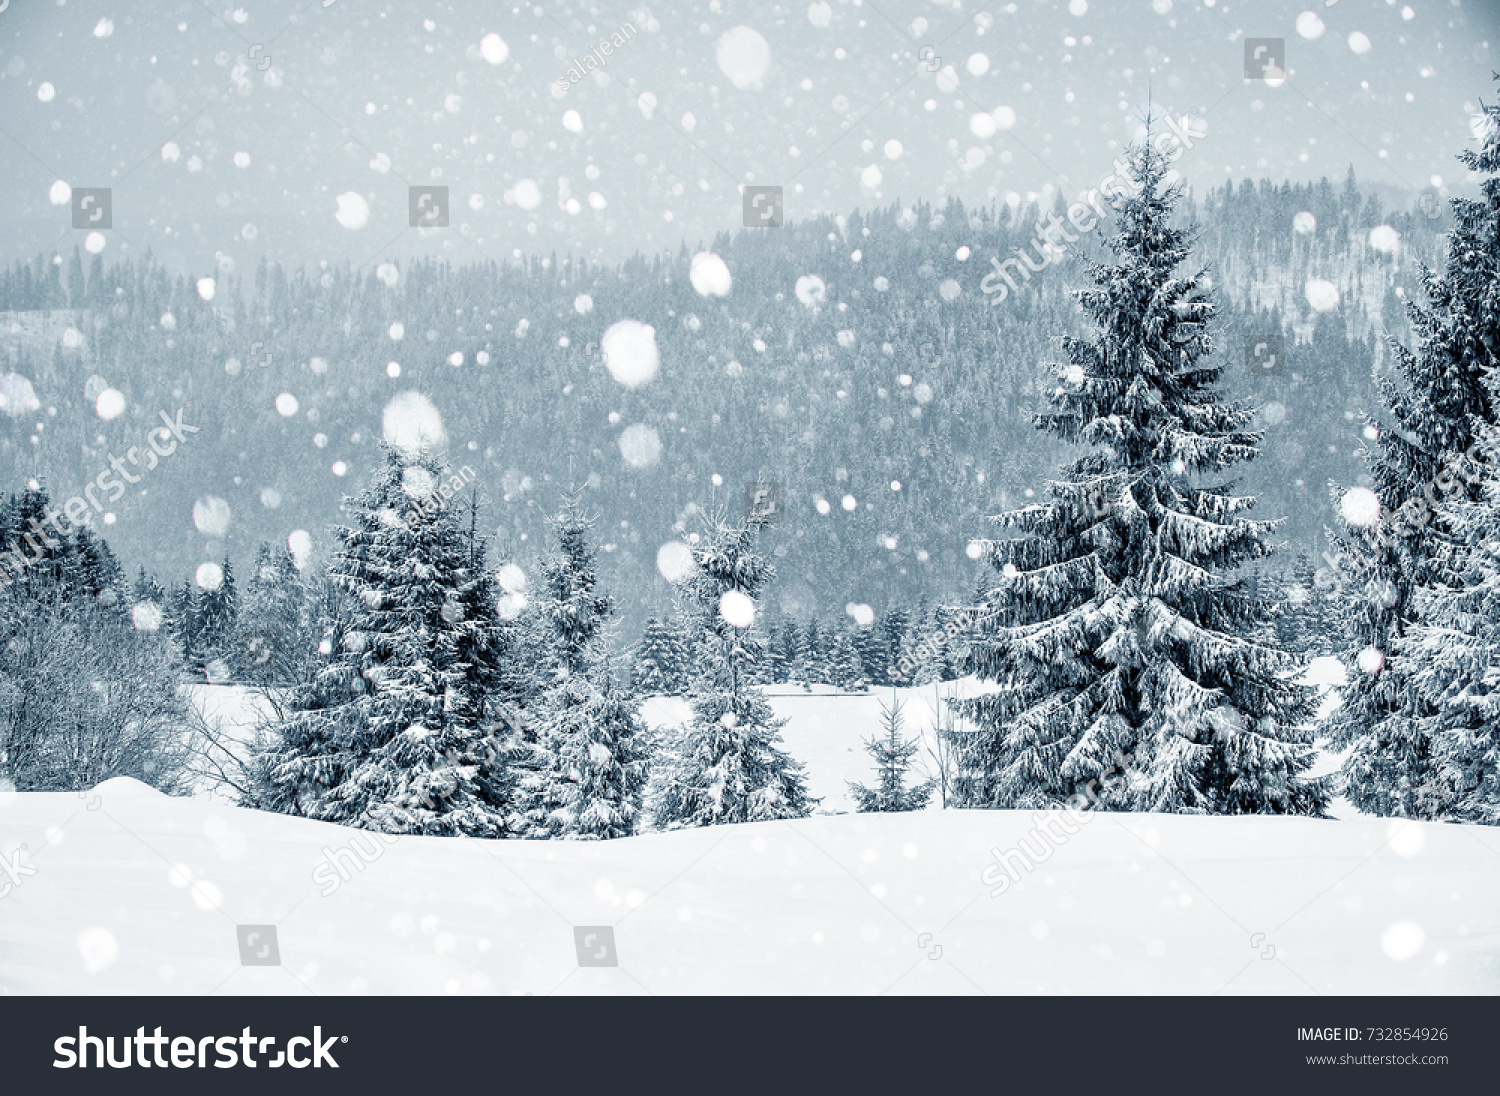 Winter wonderland with fir trees. Christmas greetings concept with snowfall  #732854926